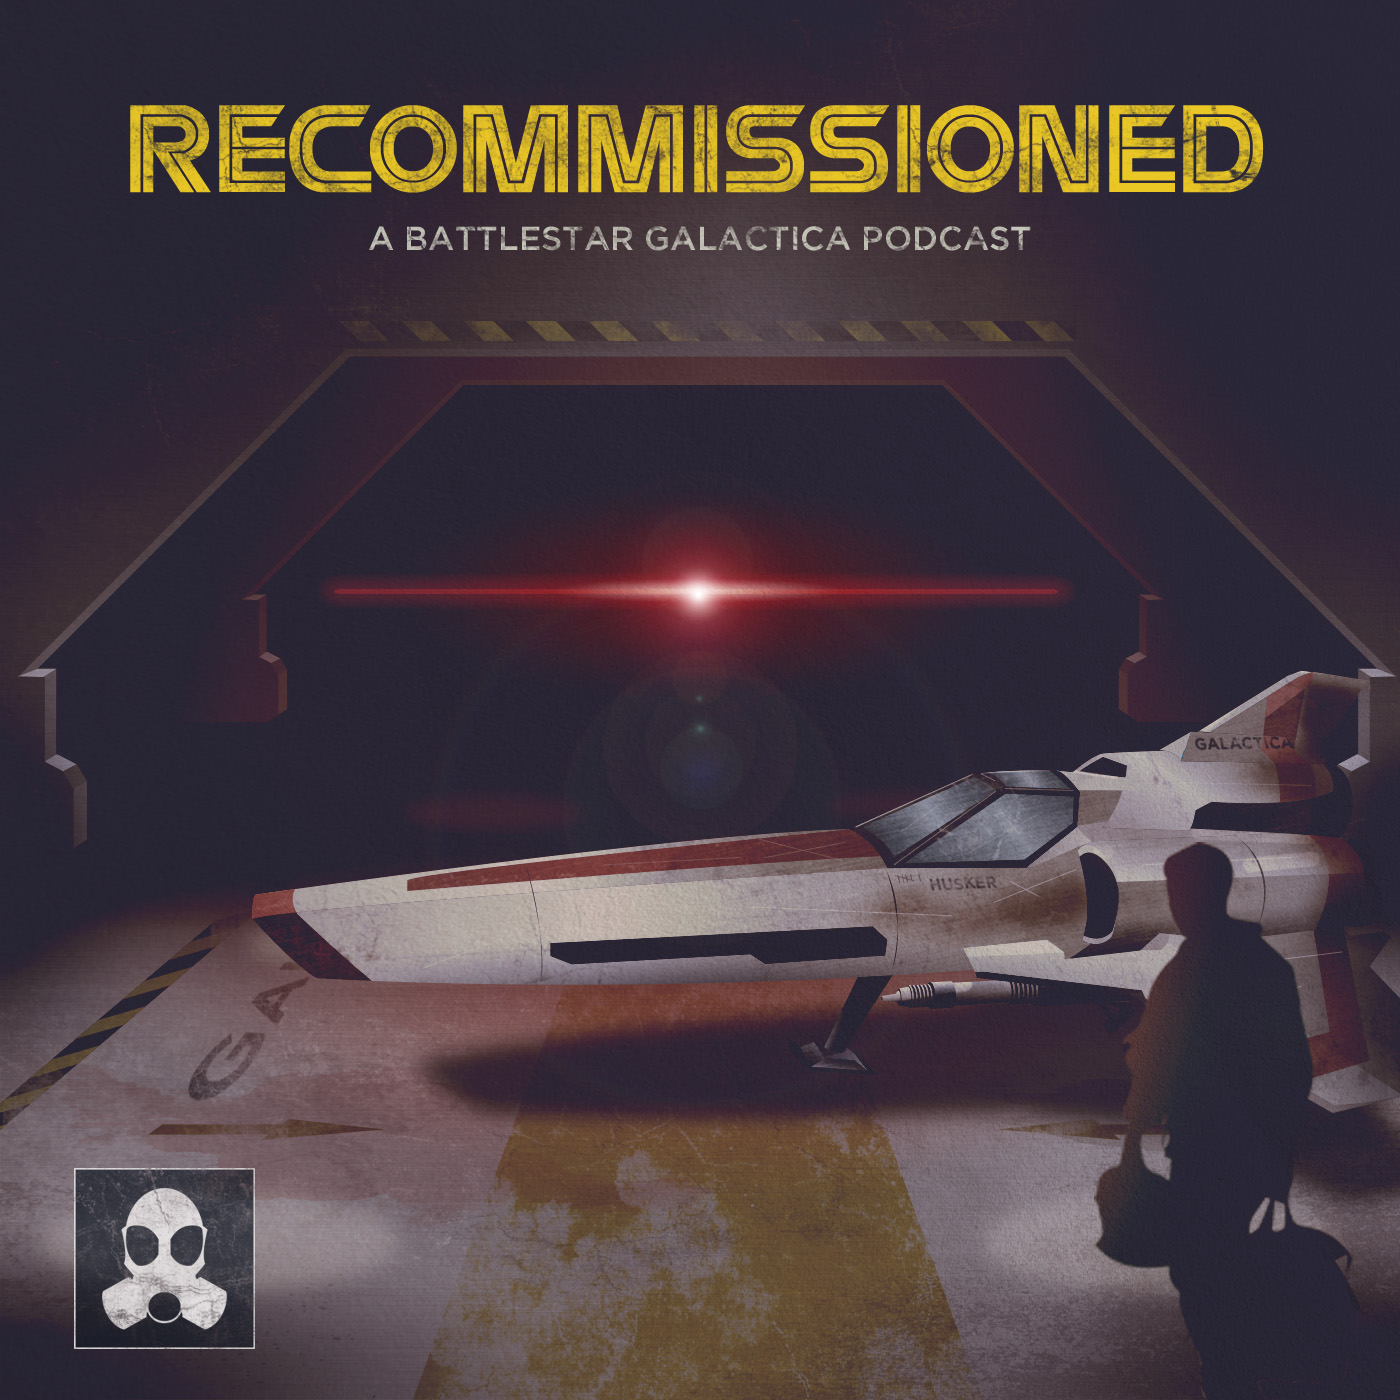 Welcome to 'Recommissioned: A Battlestar Galactica Podcast'